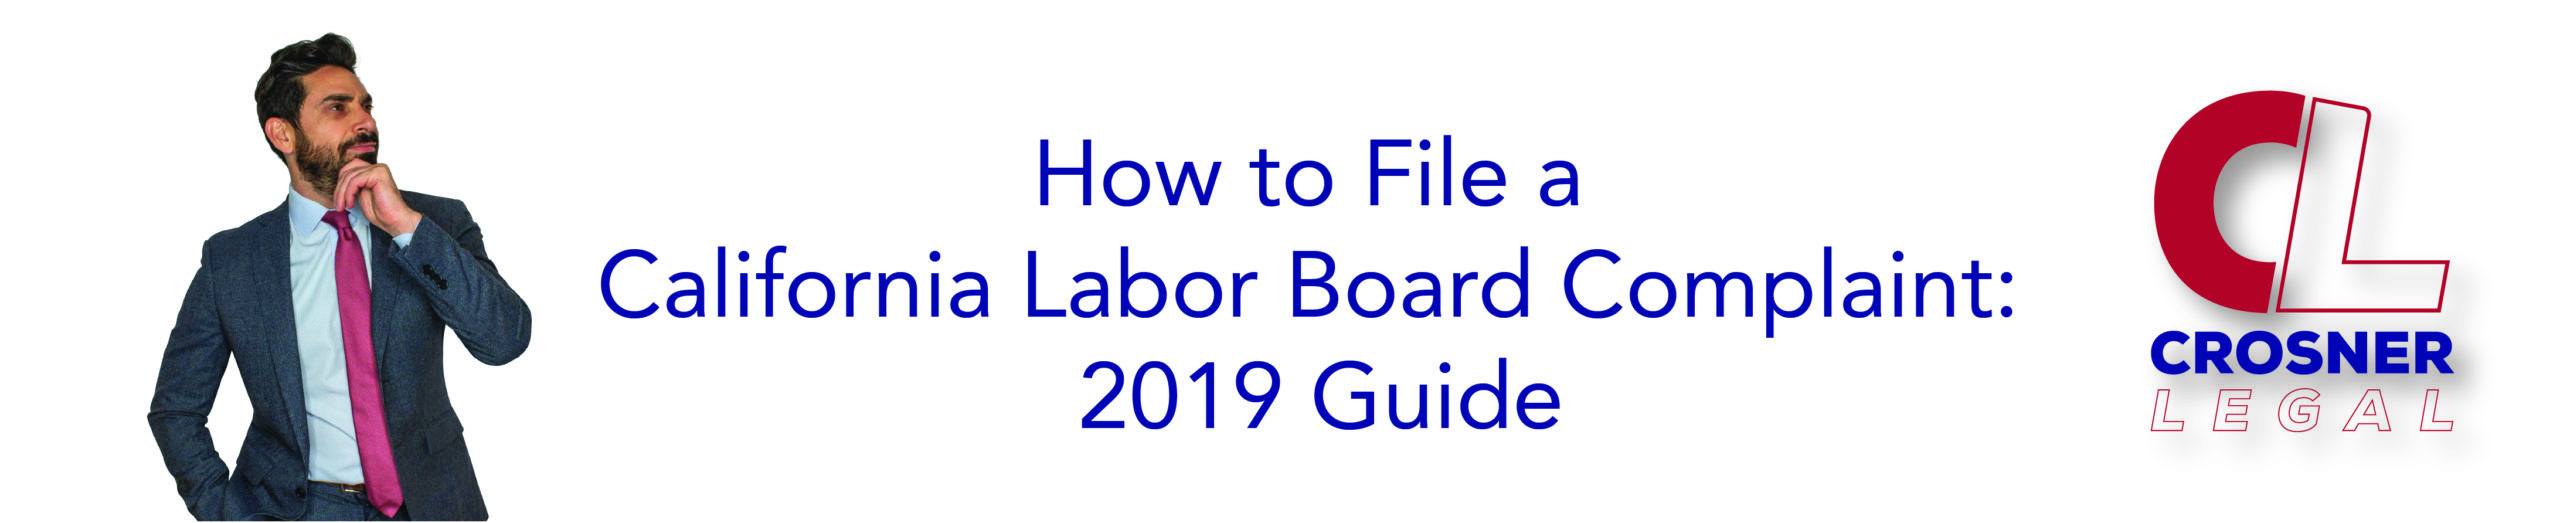 How to File a California Labor Board Complaint: 2019 Guide